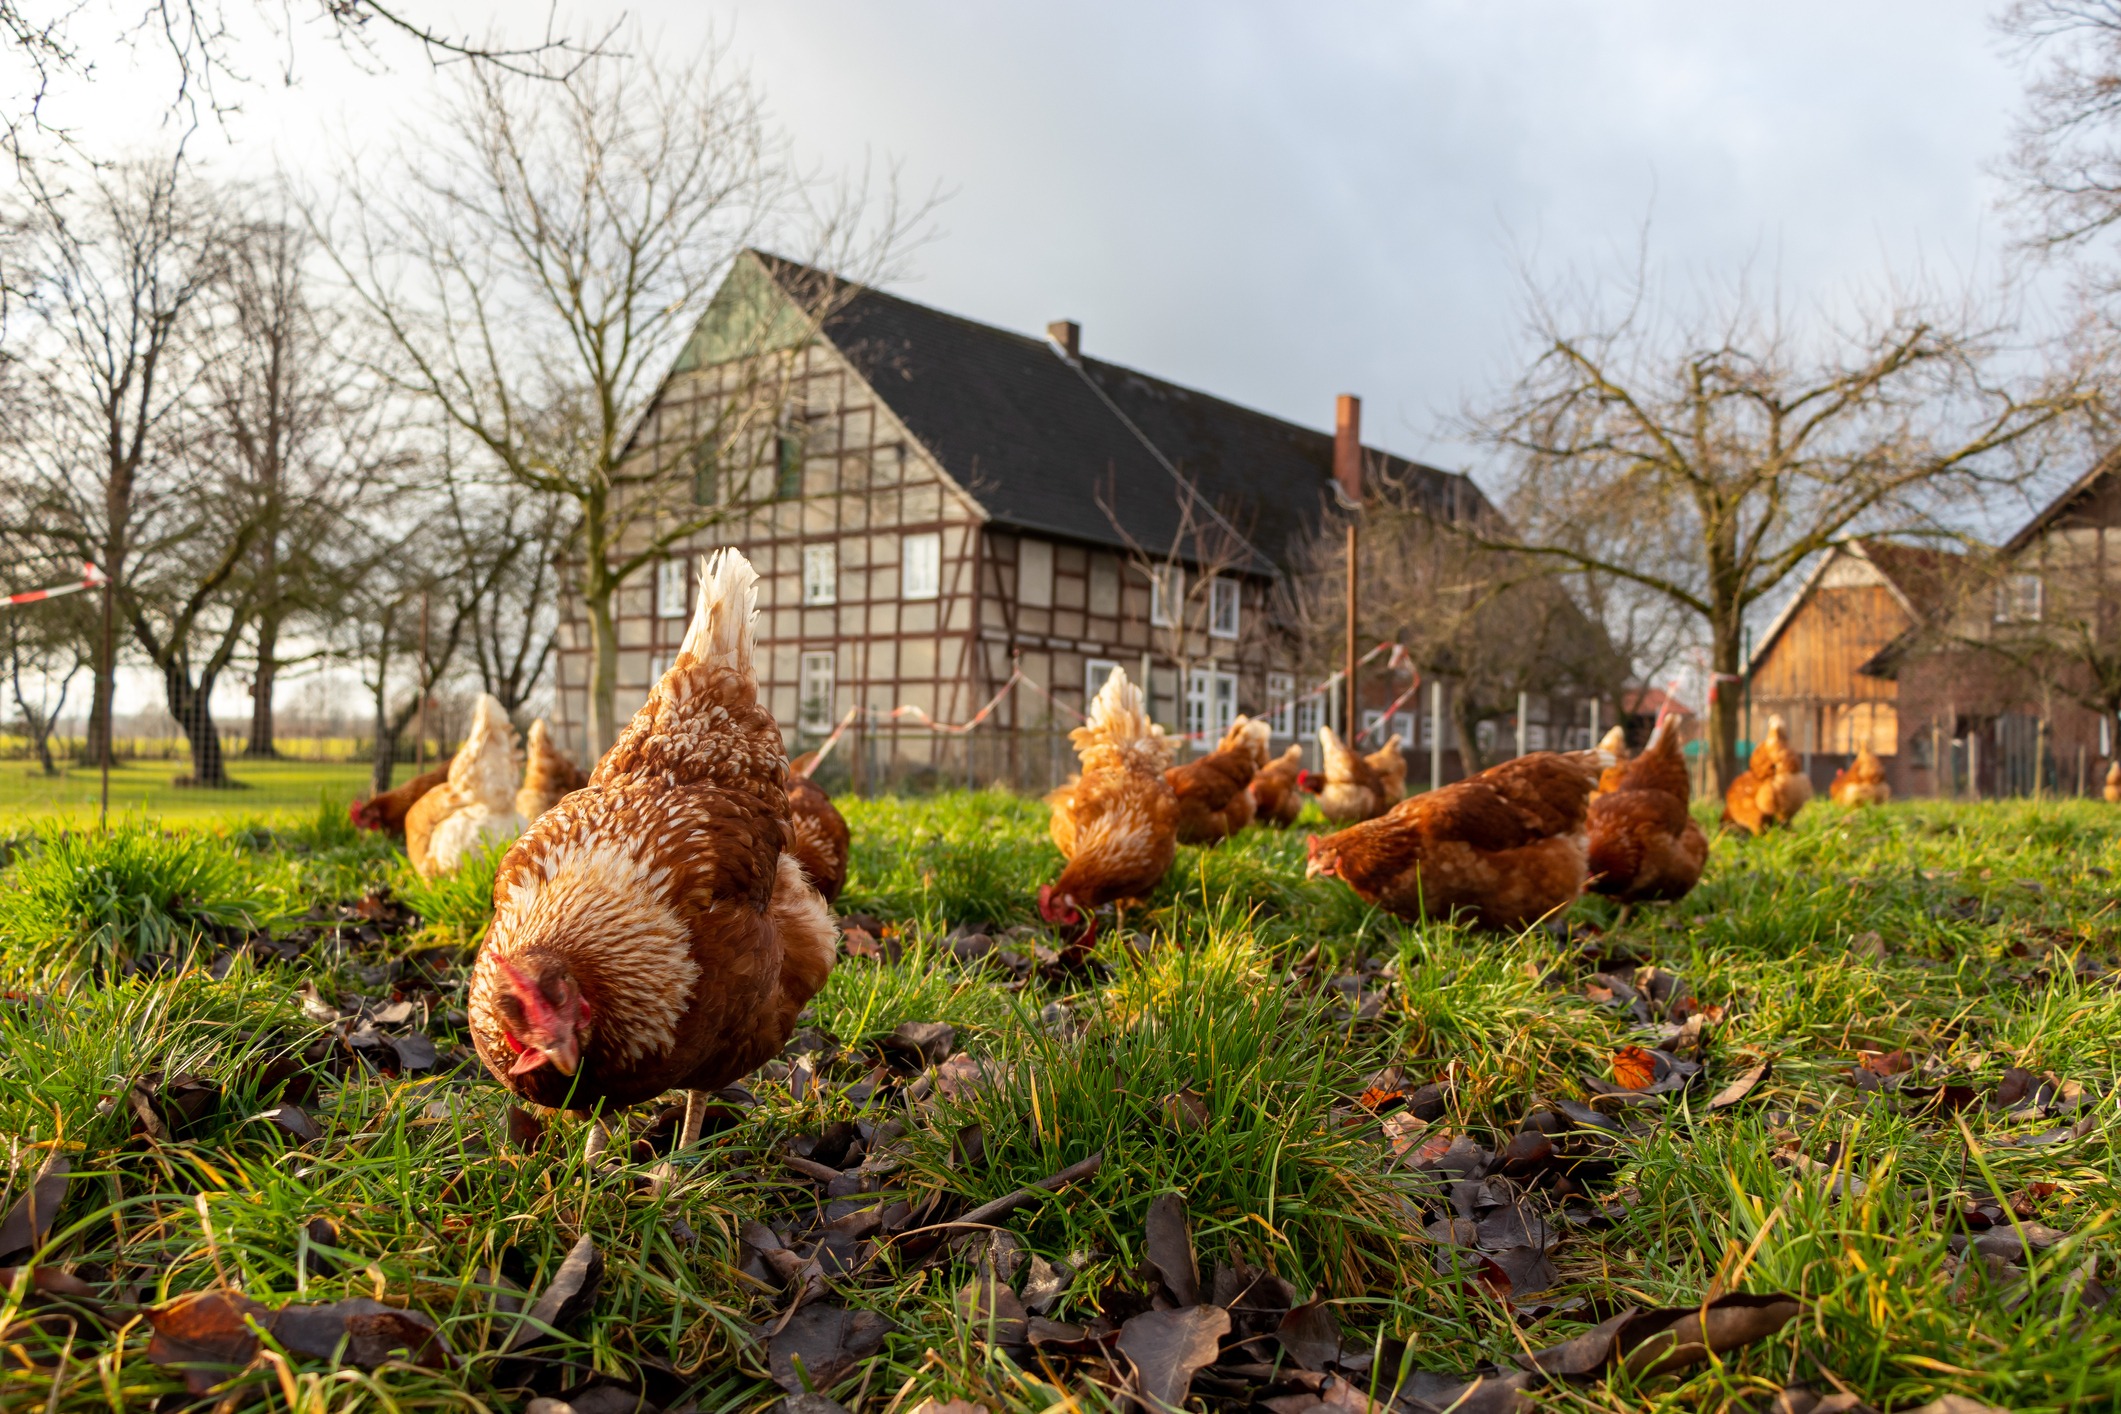 free range chickens in a country farm